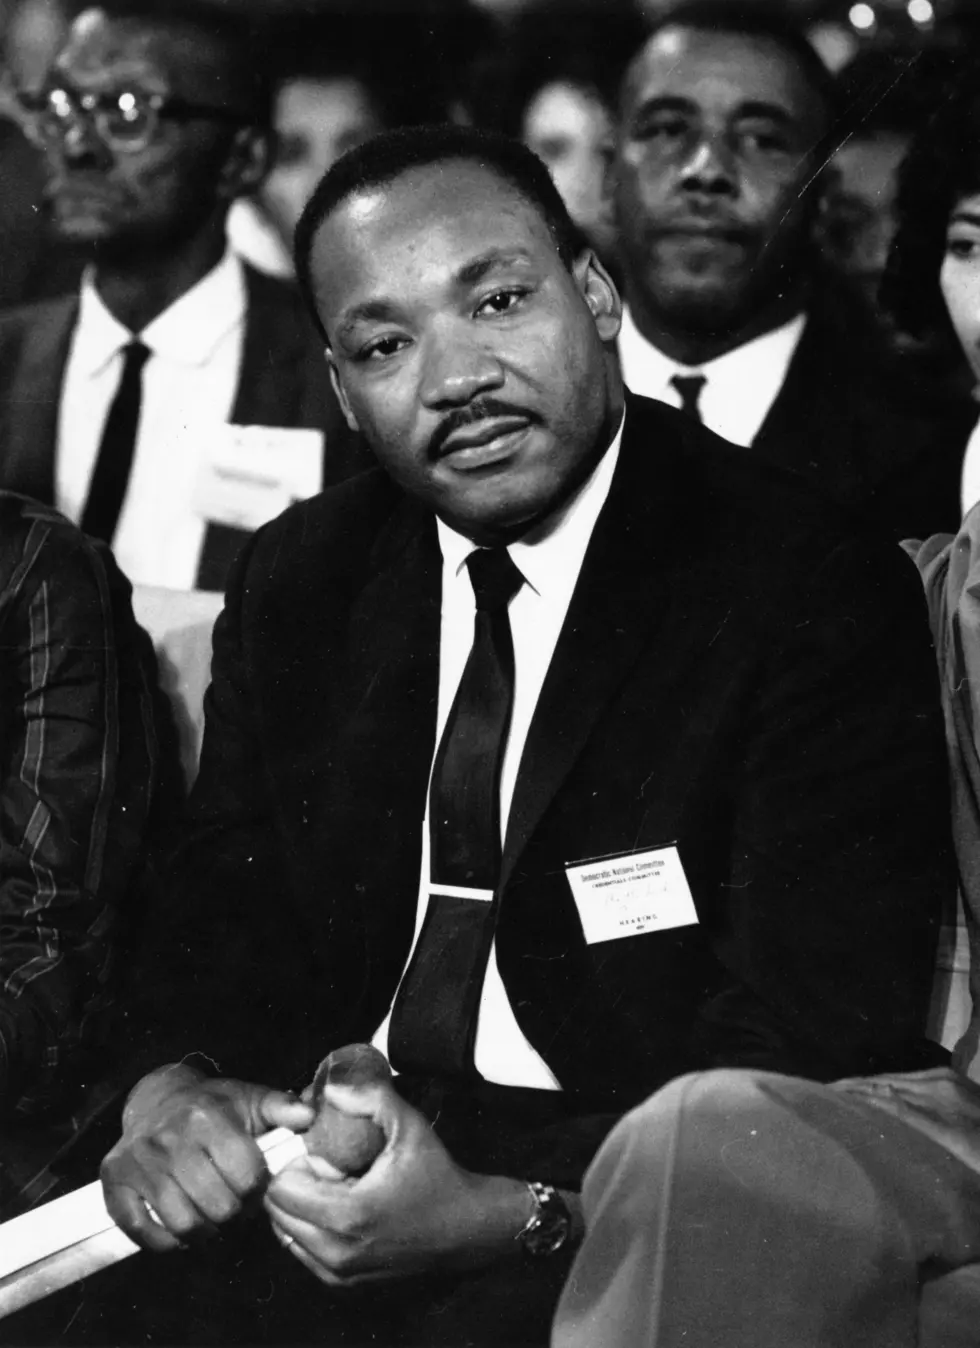 Remembering Dr King [VIDEO]